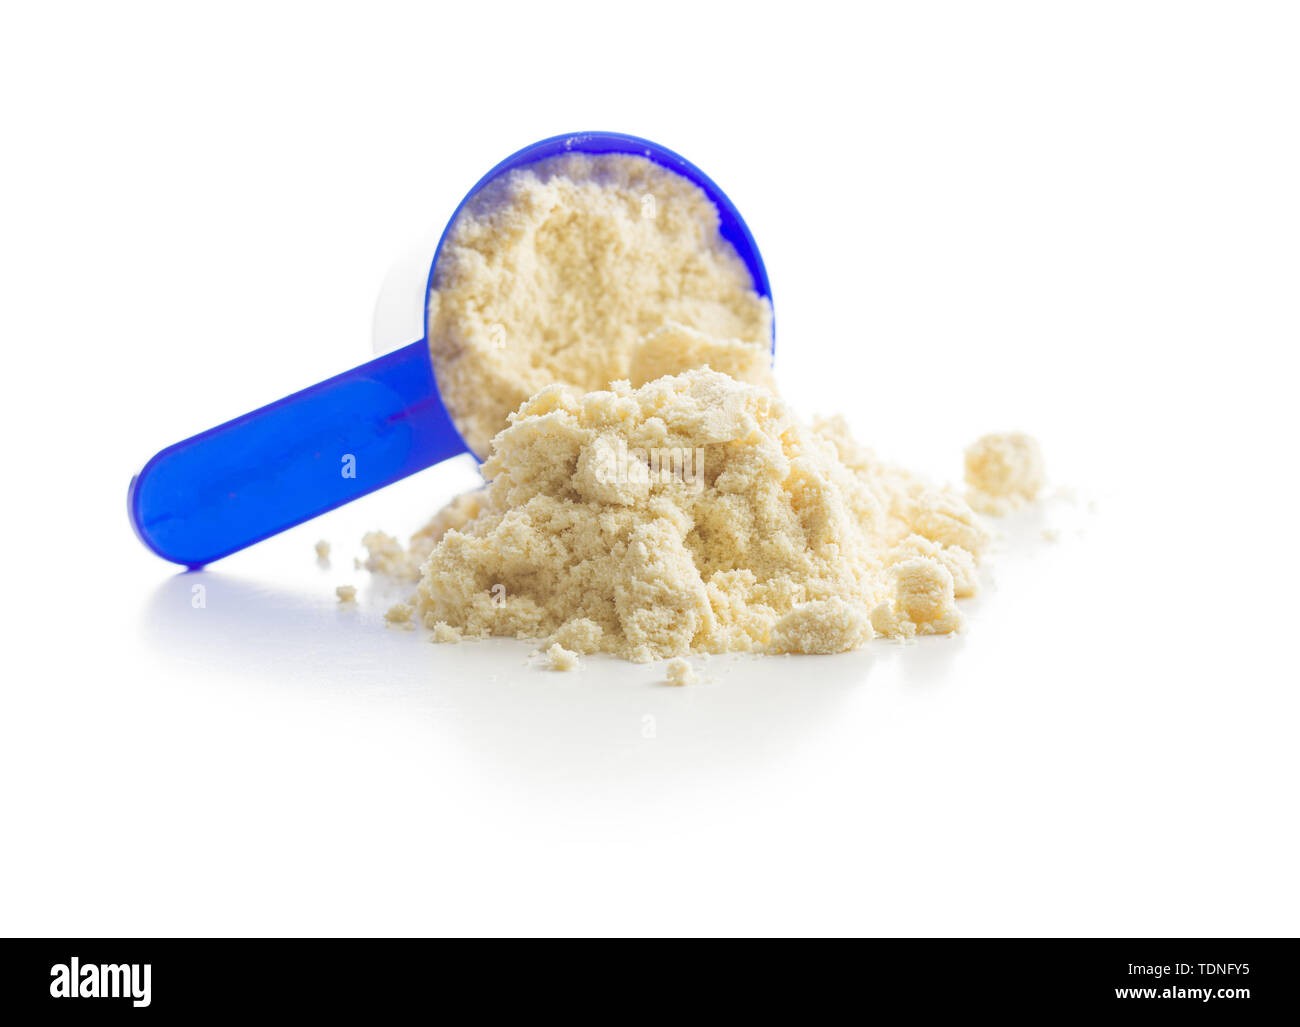 https://c8.alamy.com/comp/TDNFY5/whey-protein-powder-in-scoop-isolated-on-white-background-TDNFY5.jpg